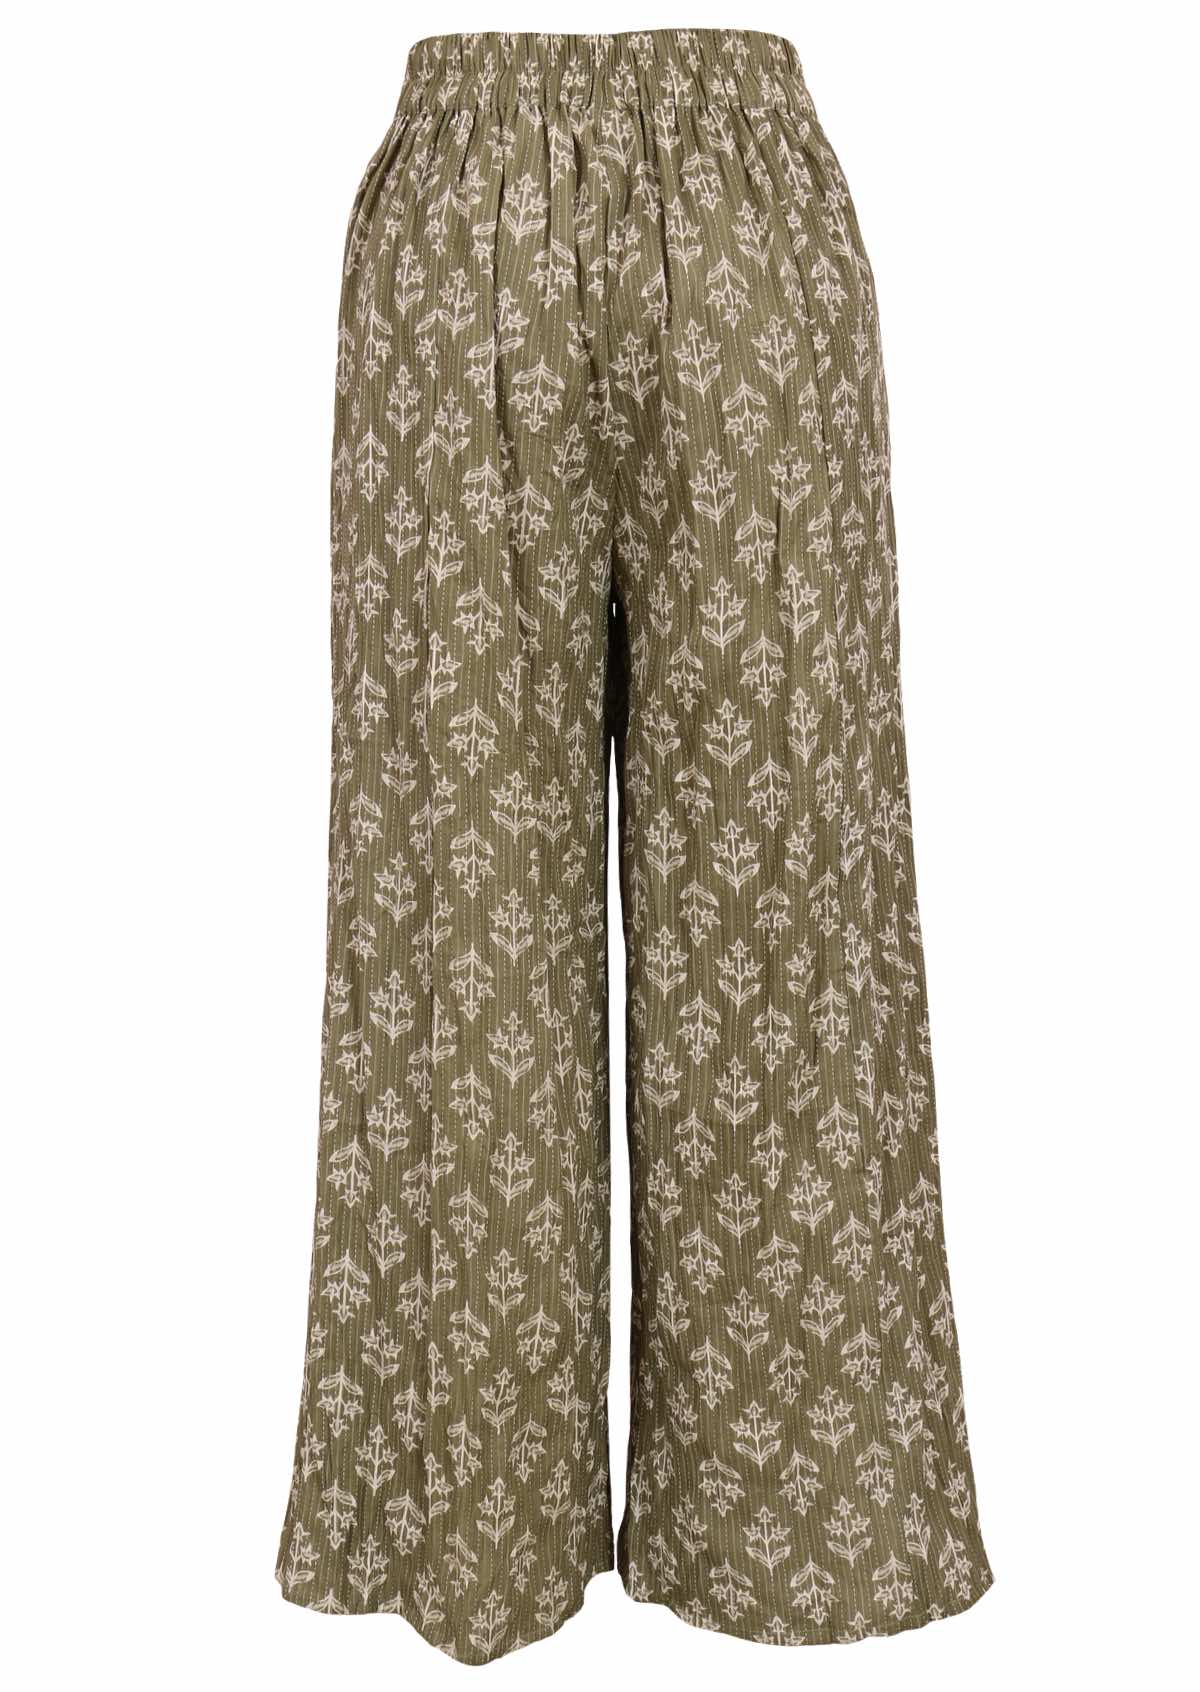 Wide leg lightweight cotton pants with floral print on green base